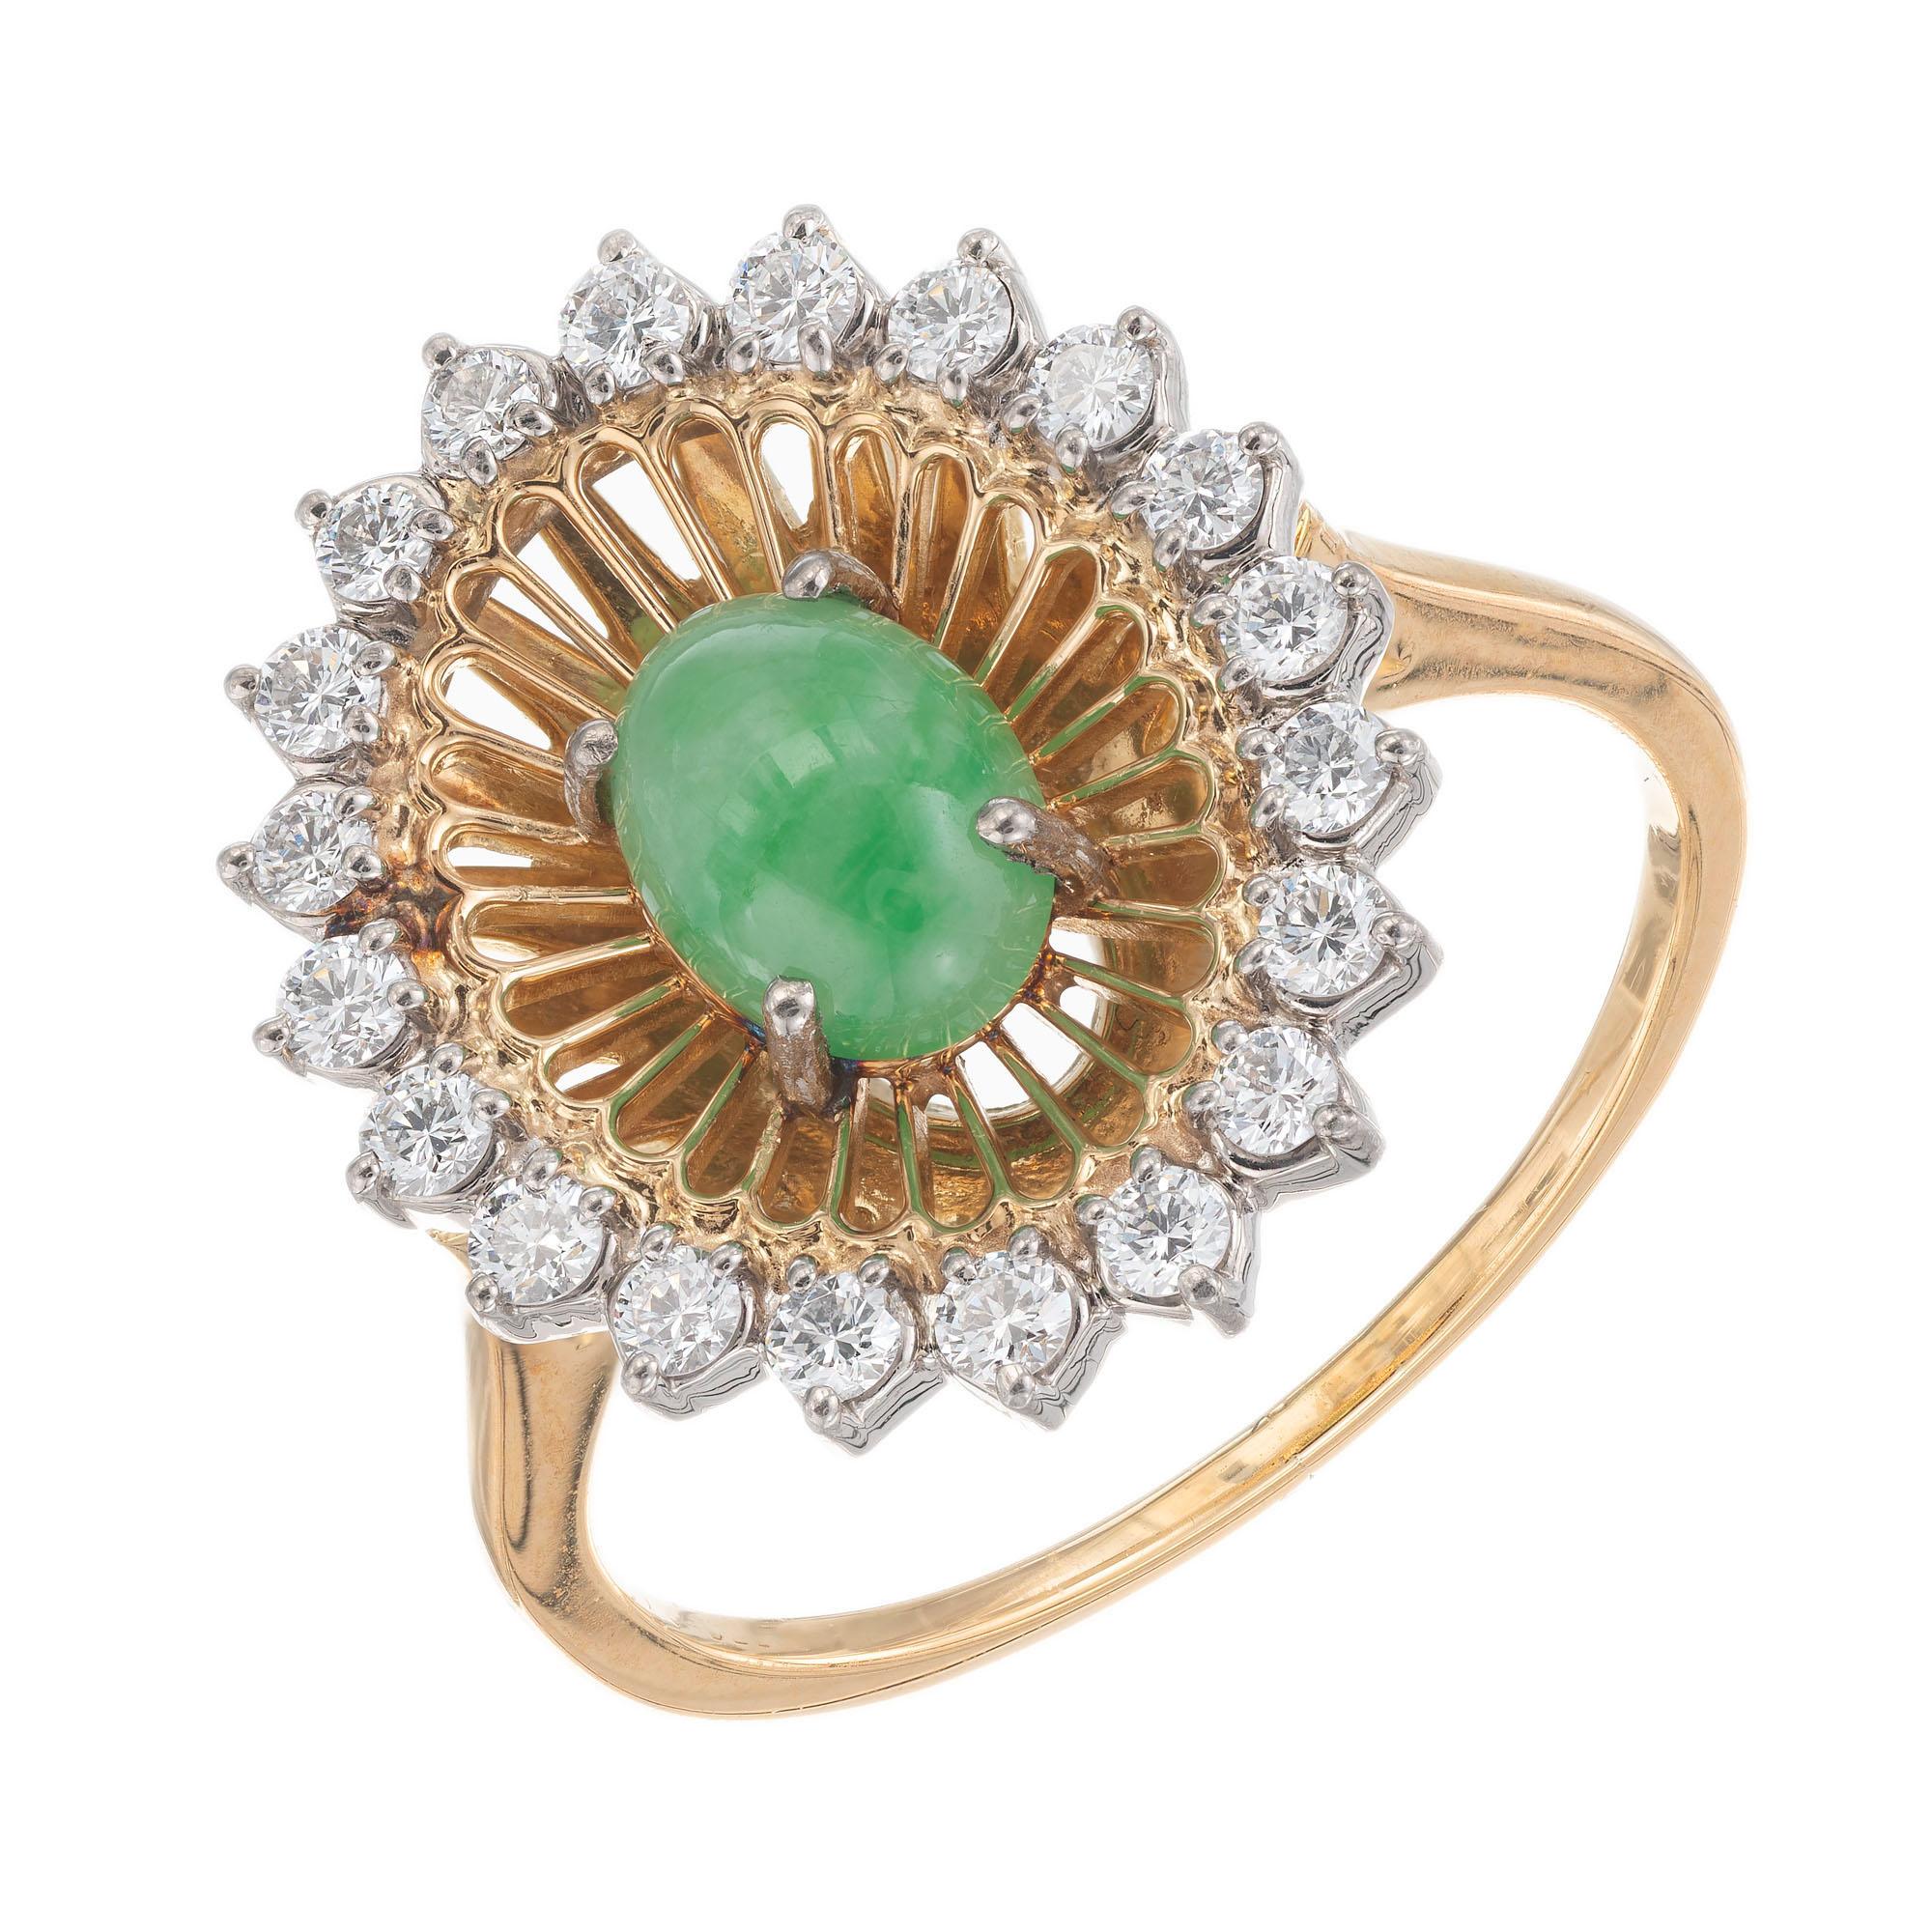 Vintage 1950's jade and diamond cocktail ring. GIA certified oval center jade with an outer halo of twenty round diamonds in an 18k yellow gold setting. 

1 oval cabochon green jadeite jade, approx. .75cts GIA certificate #2215095464
20 round